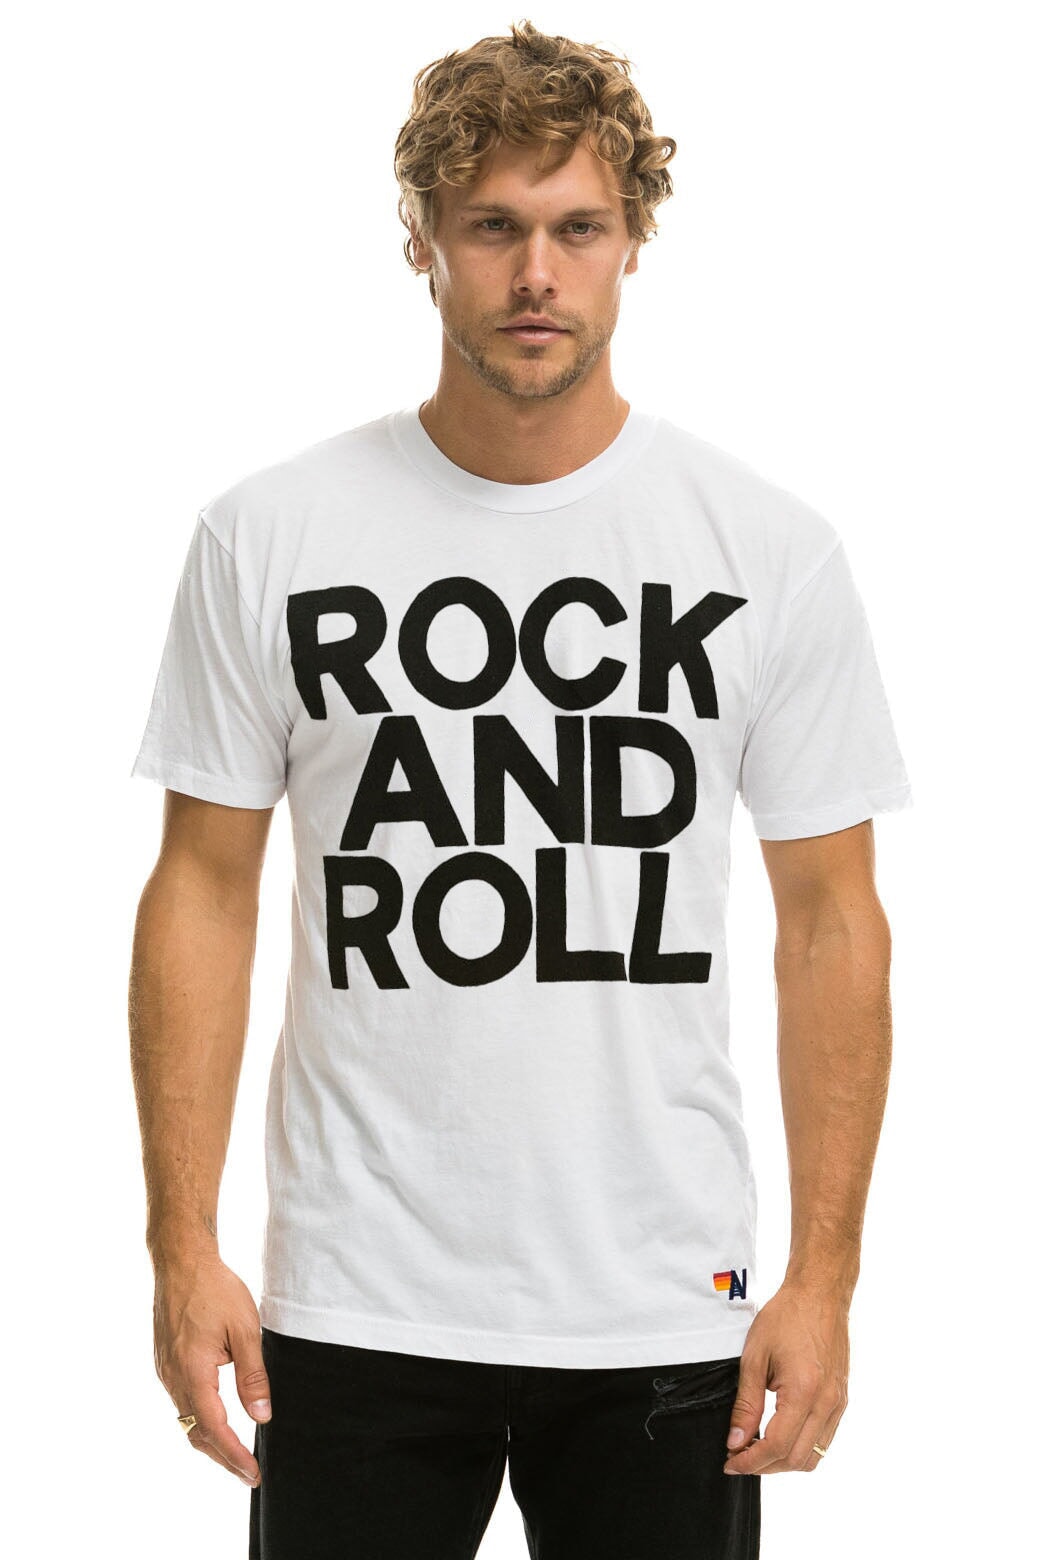 ROCK AND ROLL TEE - WHITE Tees Aviator Nation 